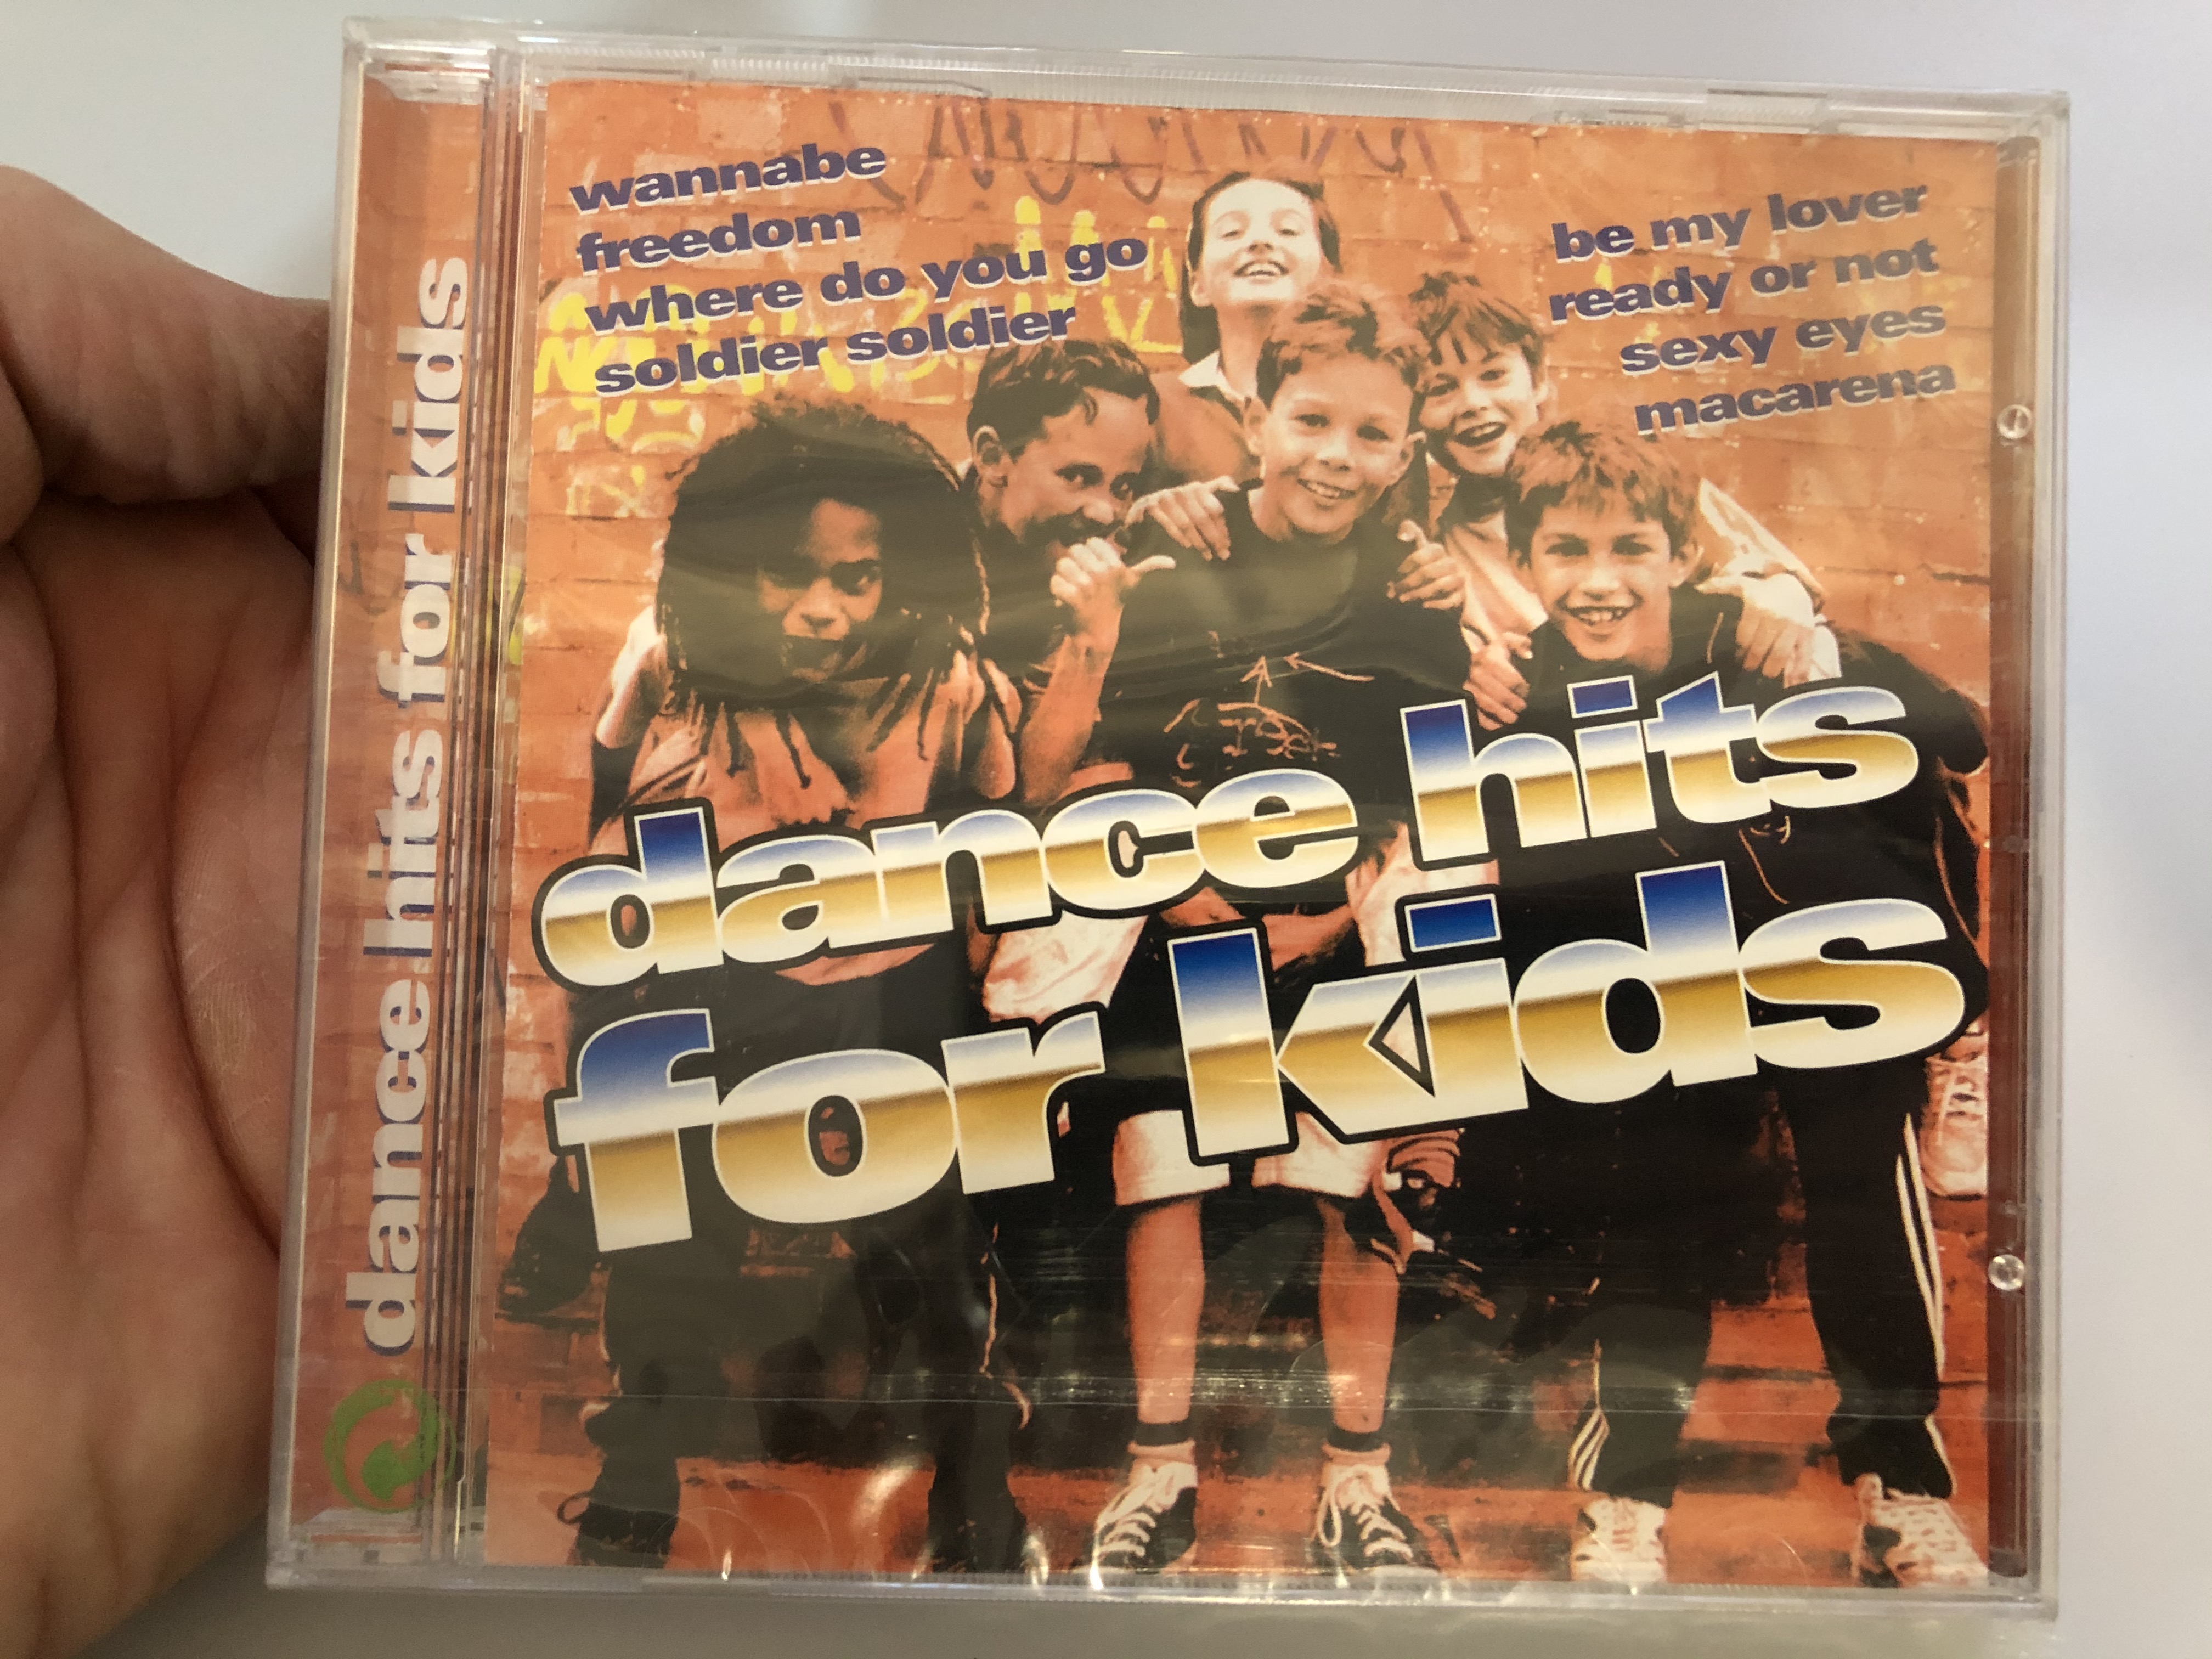 dance-hits-for-kids-wannabe-freedom-where-do-you-go-soldier-soldier-be-my-lover-ready-or-not-sexy-eyes-macarena-wise-buy-audio-cd-1997-ki-881312-1-.jpg